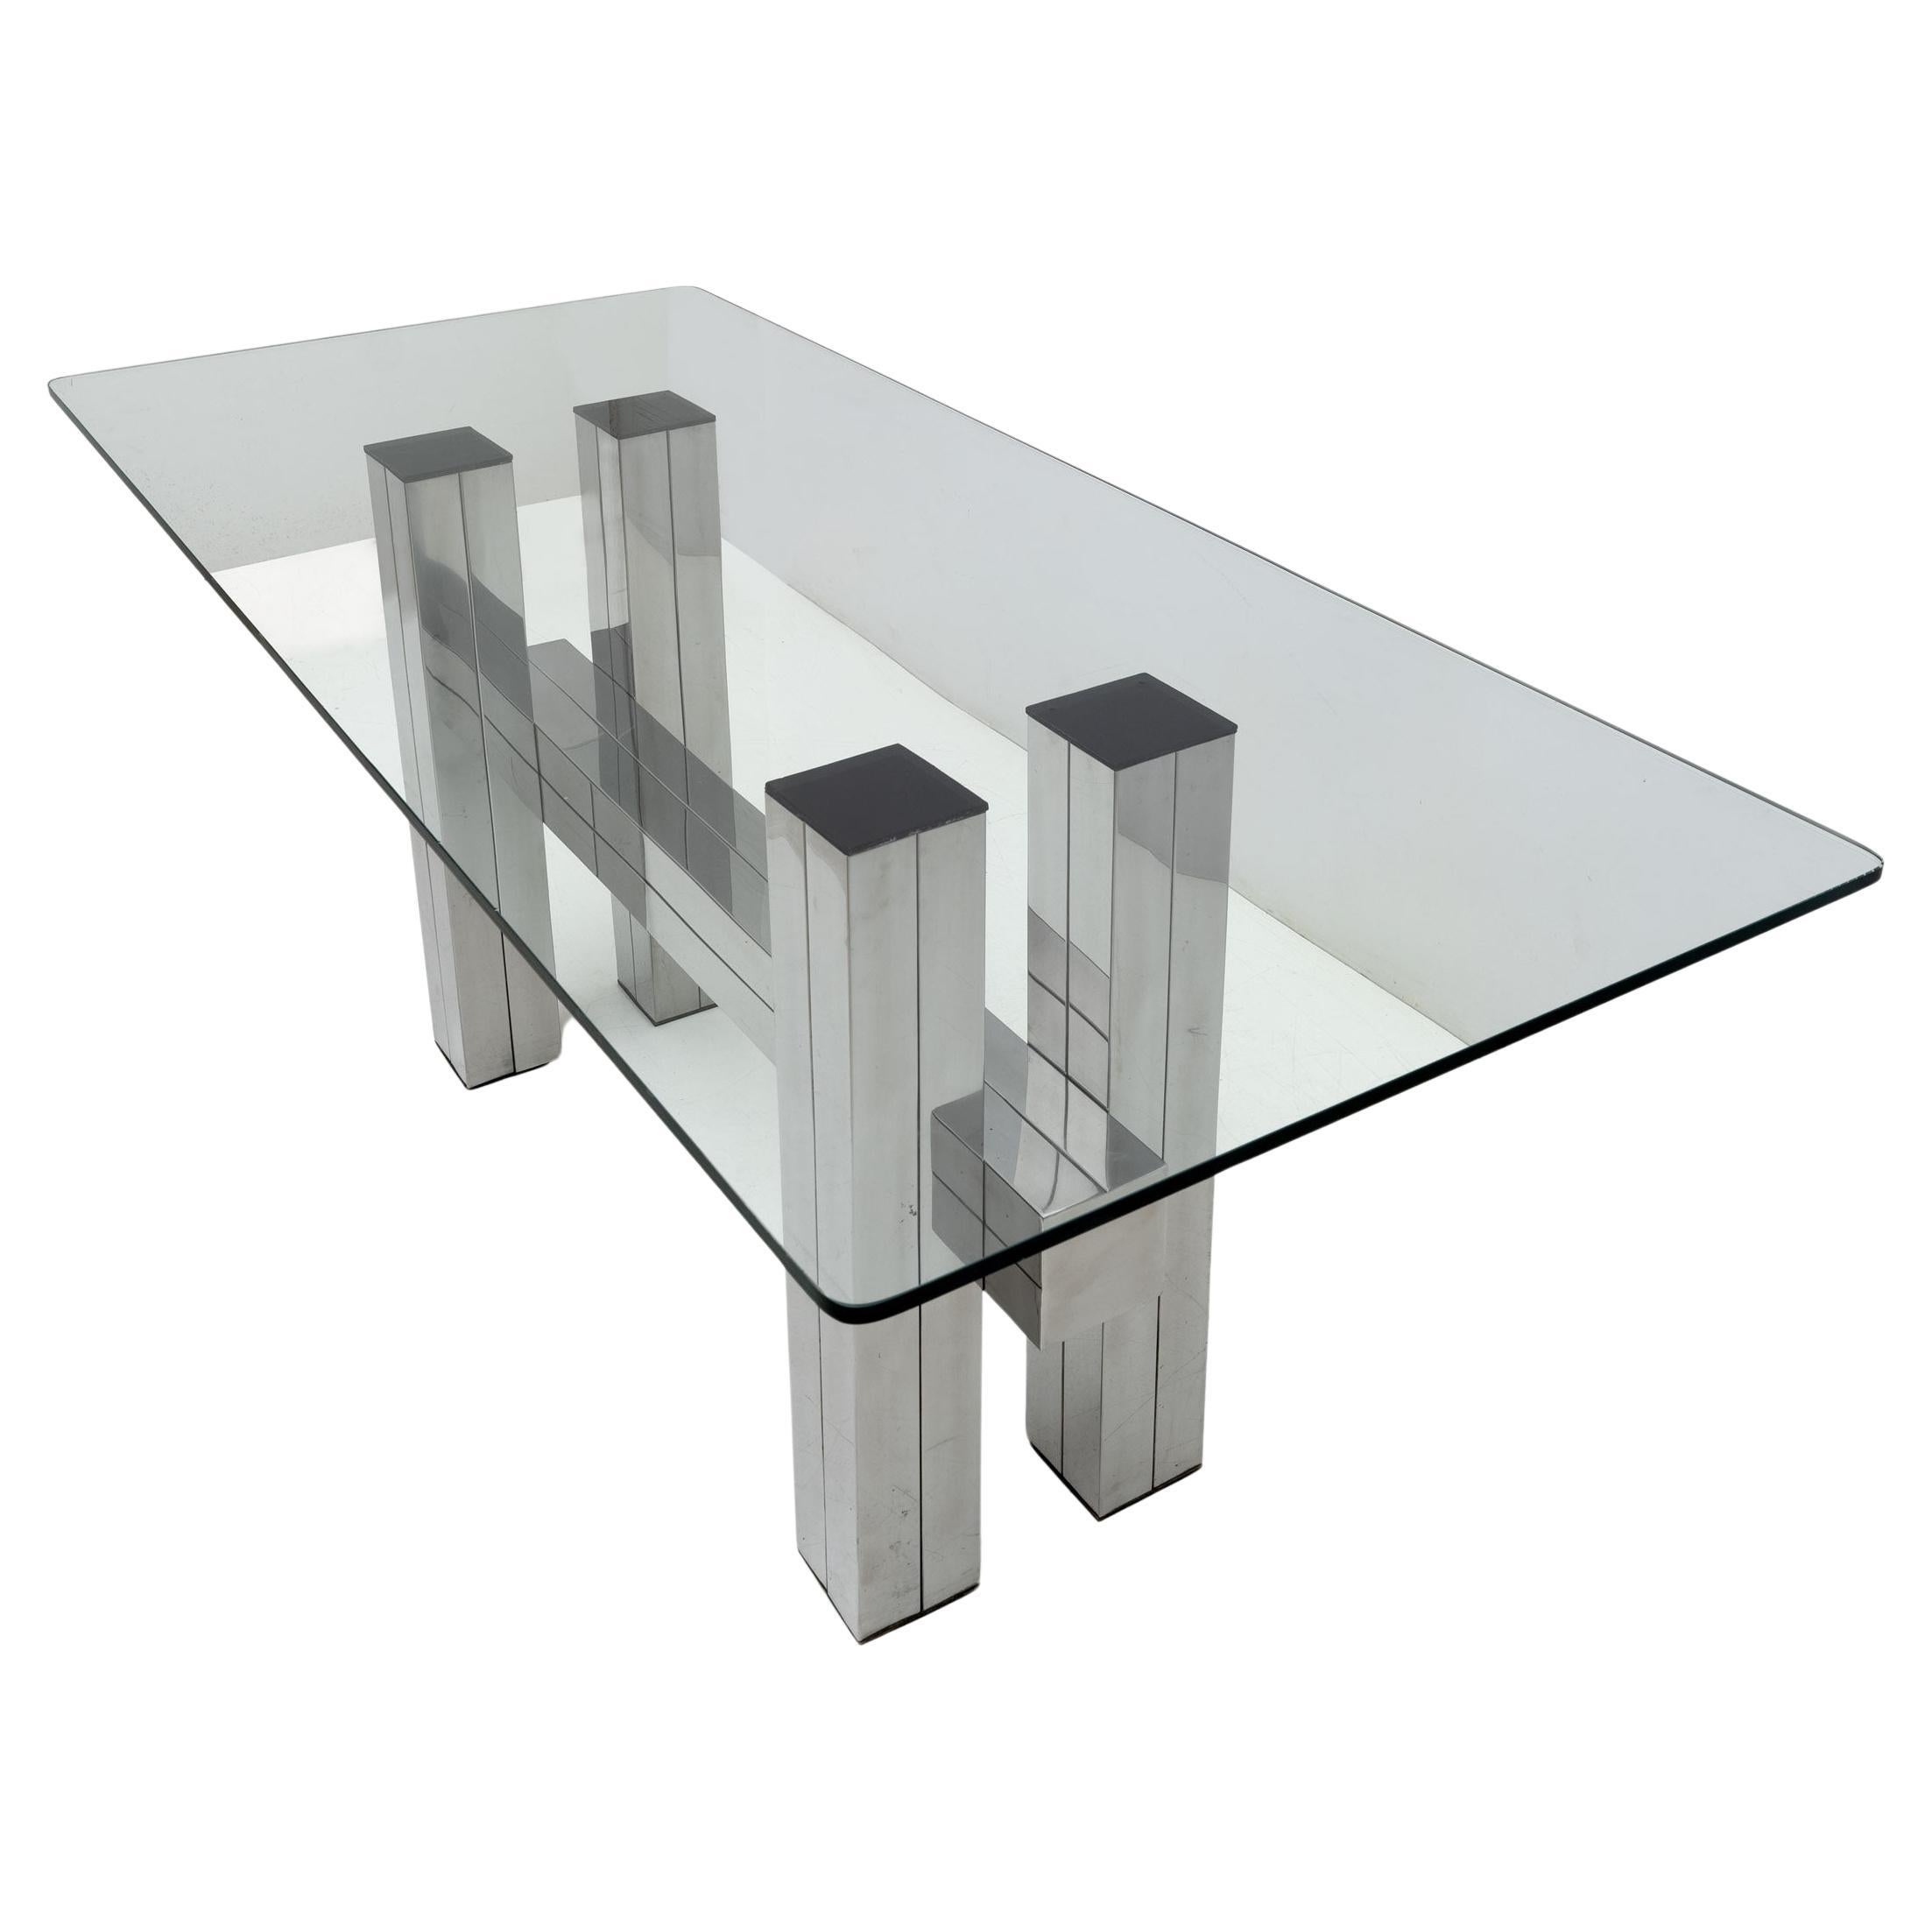 Mid-century Modern Italian Steel and Glass Dining Table, 1980s For Sale